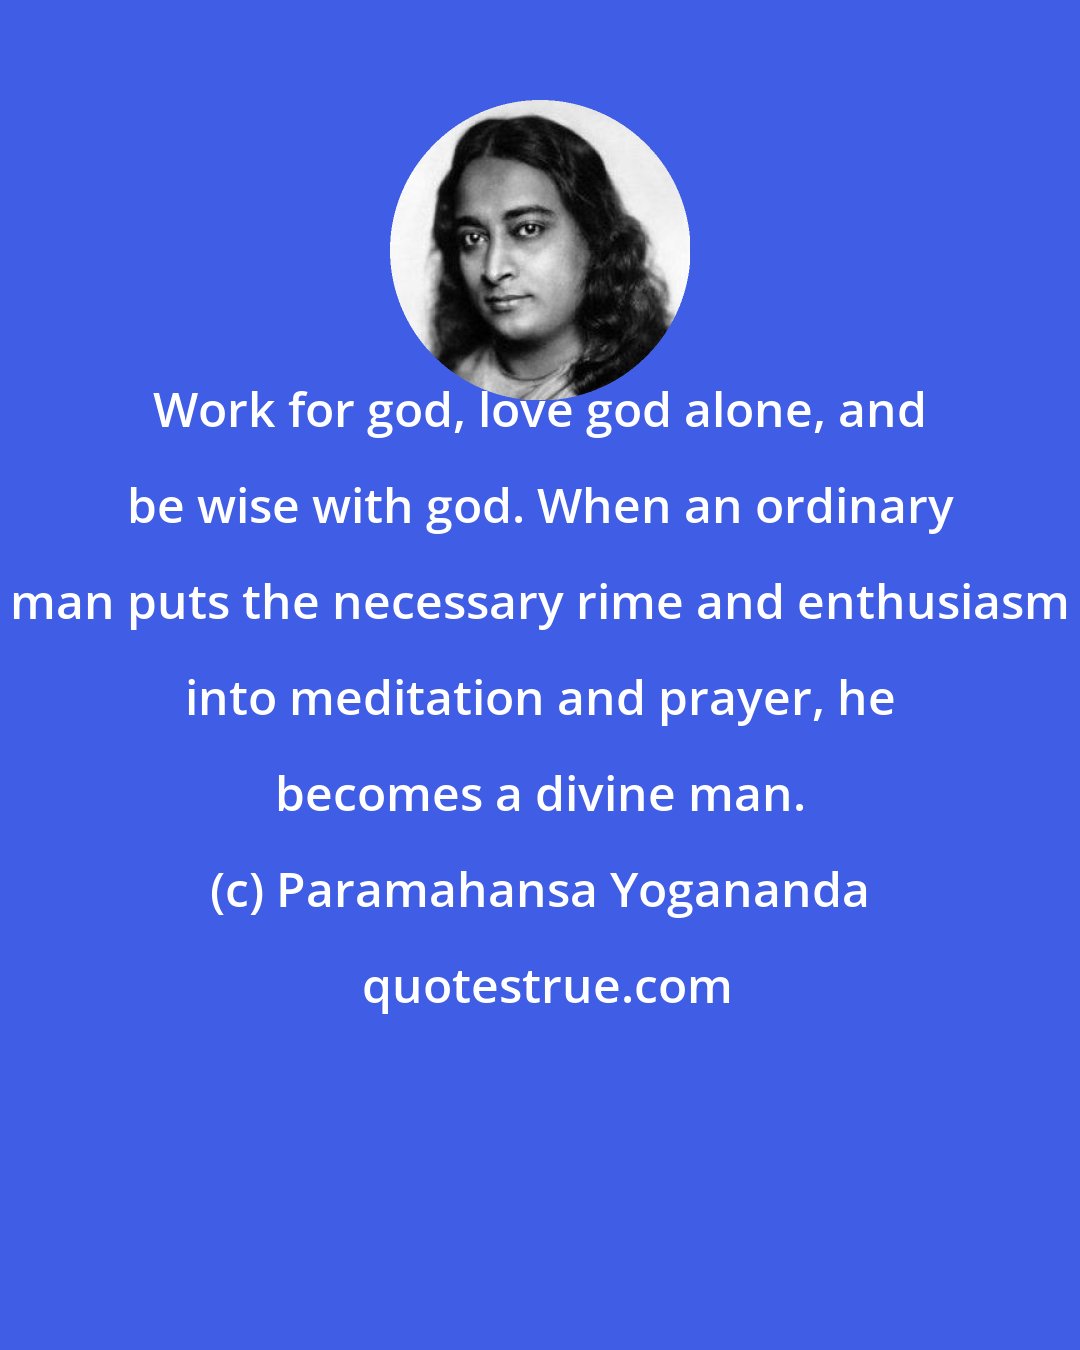 Paramahansa Yogananda: Work for god, love god alone, and be wise with god. When an ordinary man puts the necessary rime and enthusiasm into meditation and prayer, he becomes a divine man.